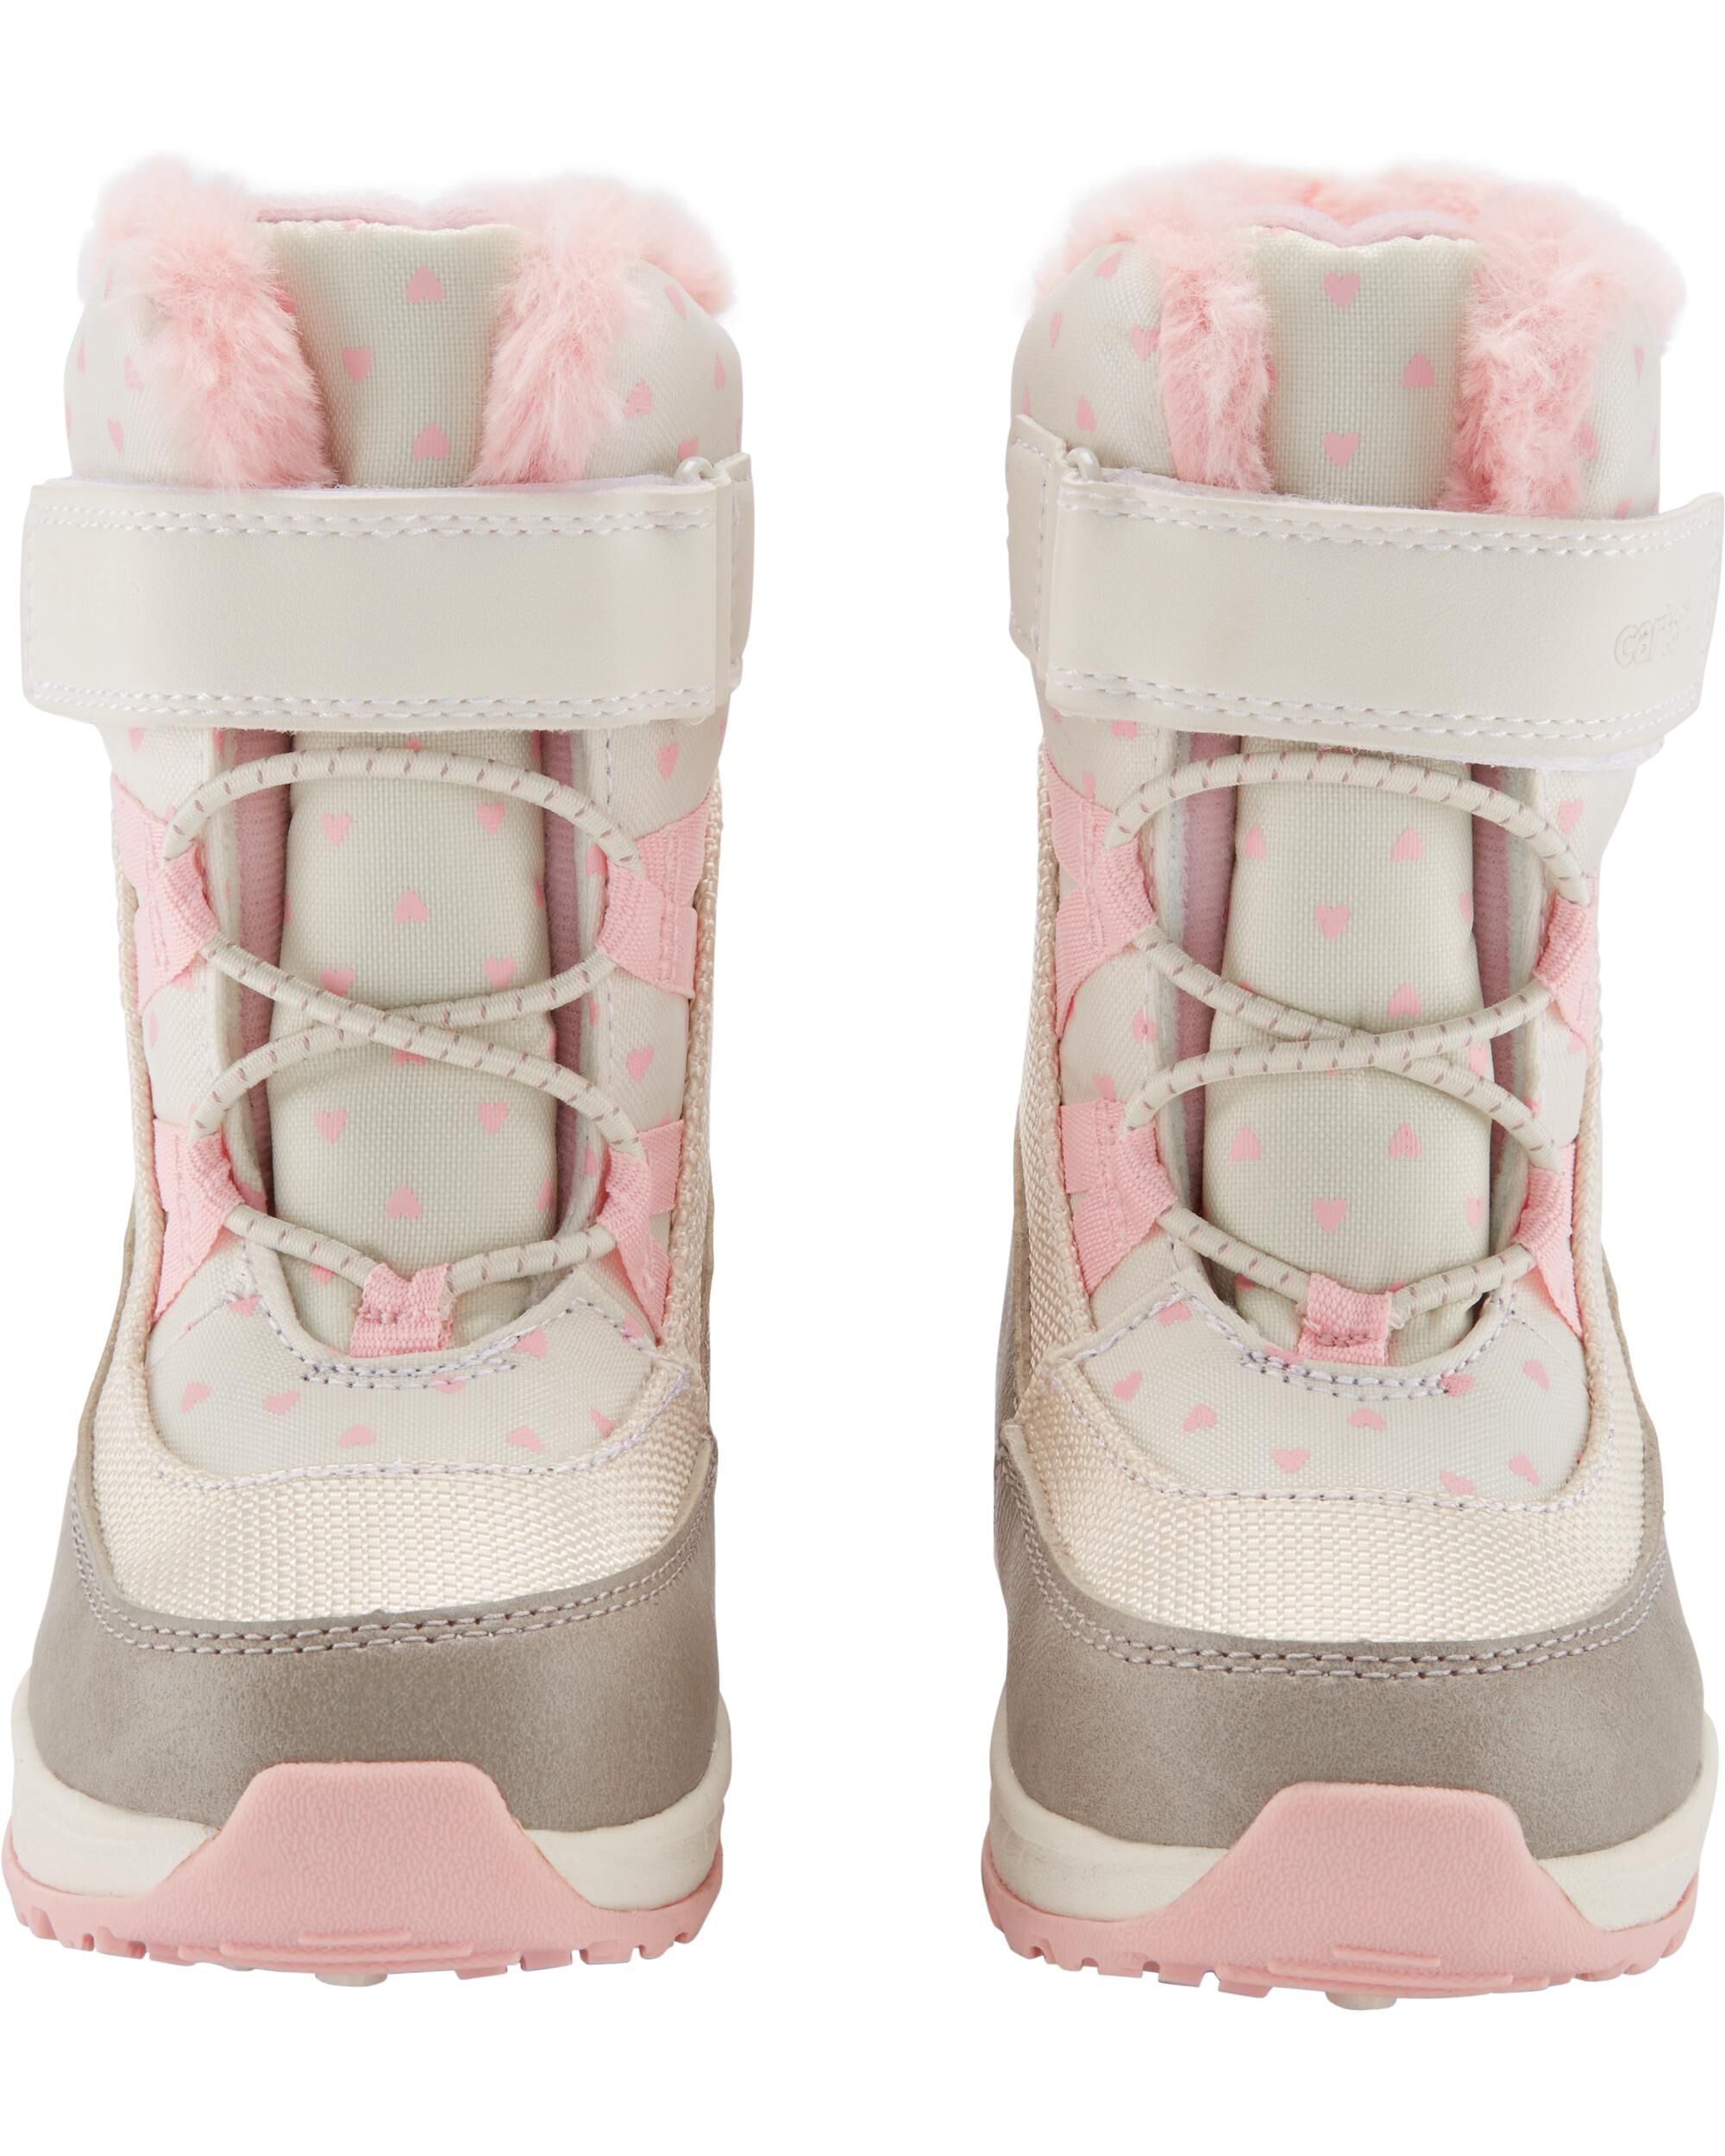 carters boy snow boots